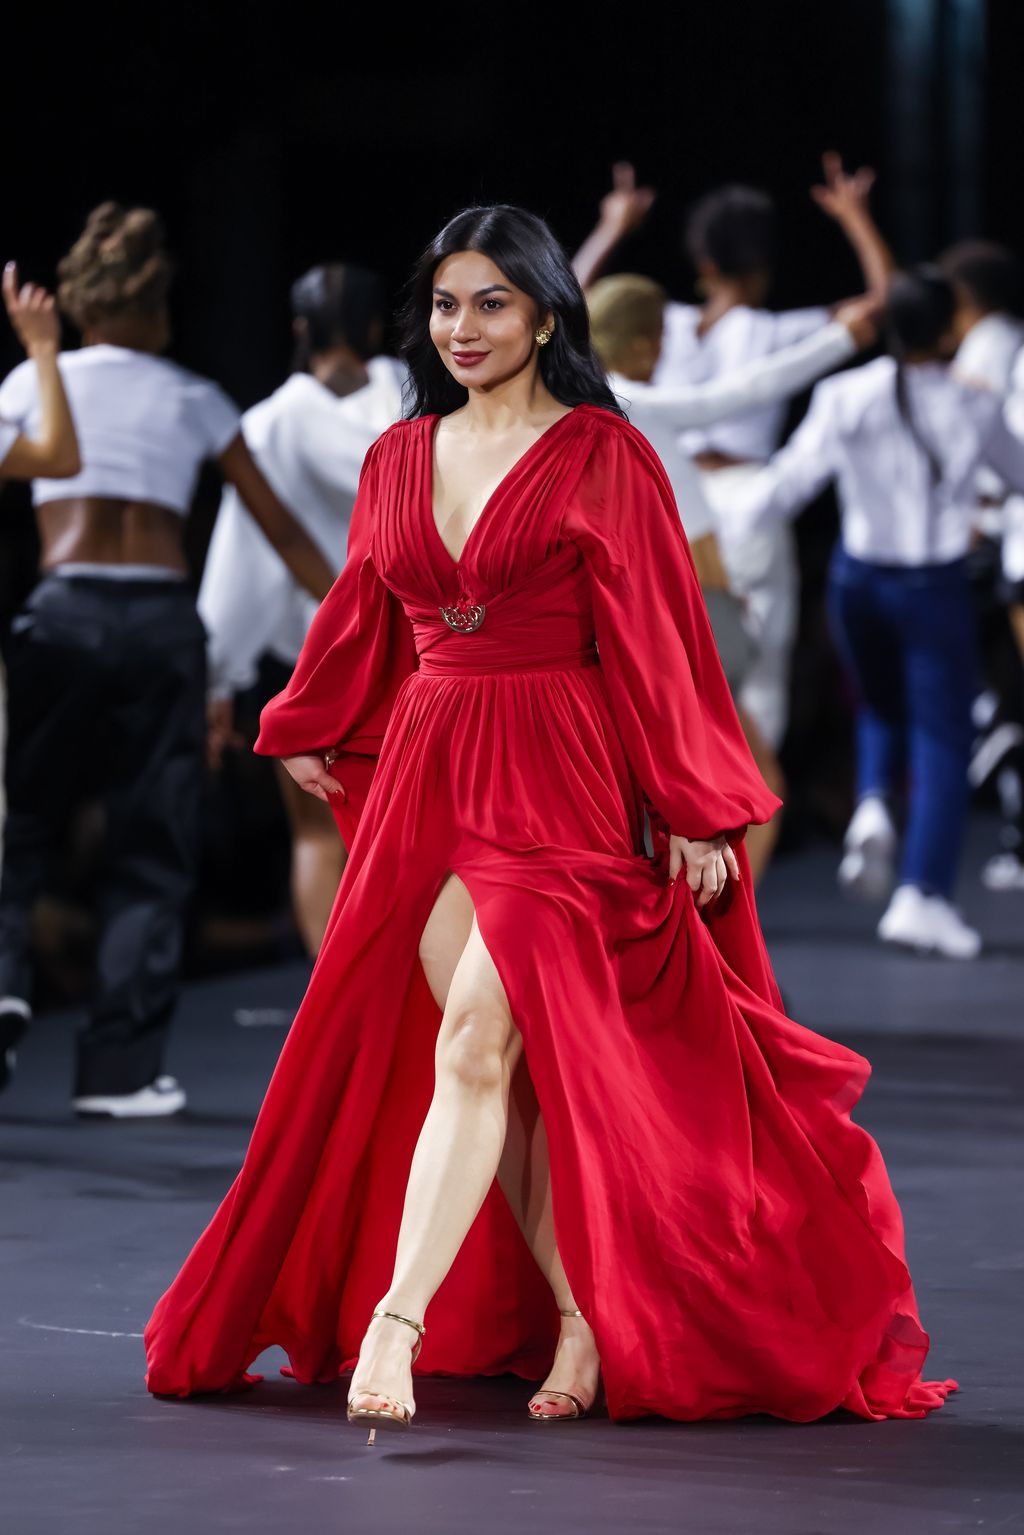 PARIS, FRANCE - OCTOBER 02: (EDITORIAL USE ONLY - For Non-Editorial use please seek approval from Fashion House) Ariel Tatum walks the runway during the 